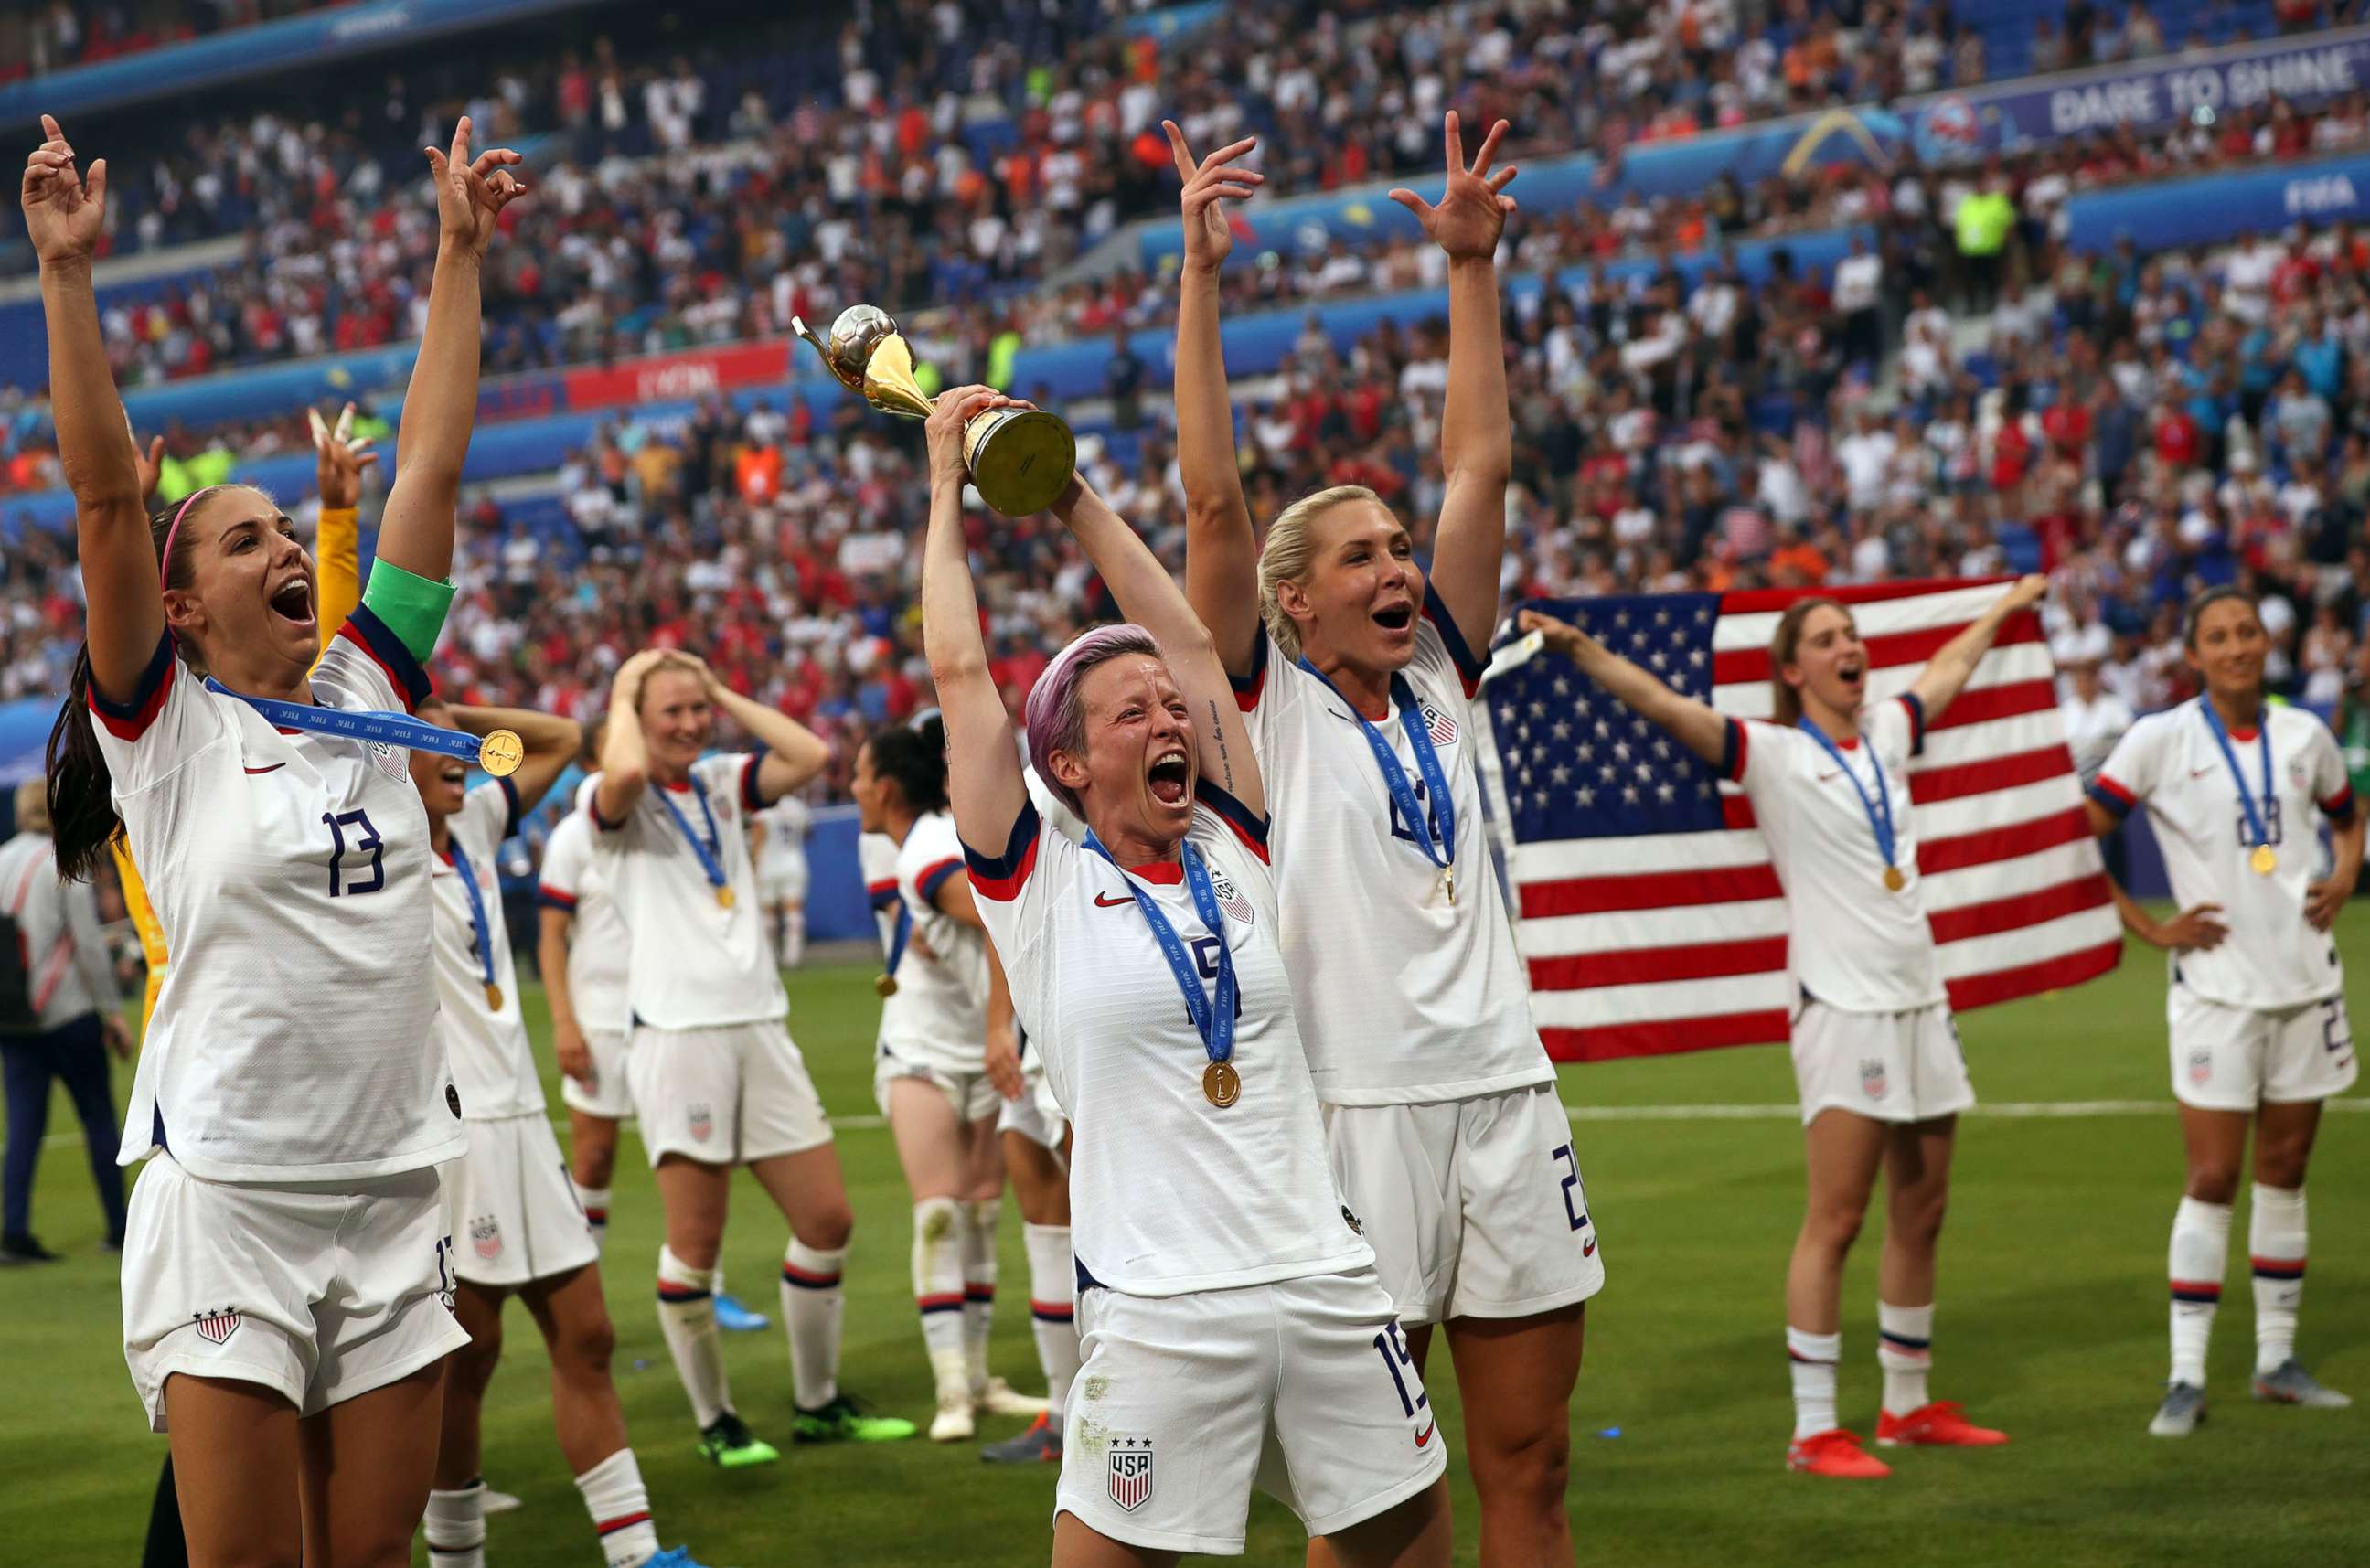 PHOTO: In this July 7, 2019, file photo, Megan Rapinoe holds the trophy celebrating at the end of the Women's World Cup final soccer match between US and The Netherlands at the Stade de Lyon in Decines, outside Lyon, France.